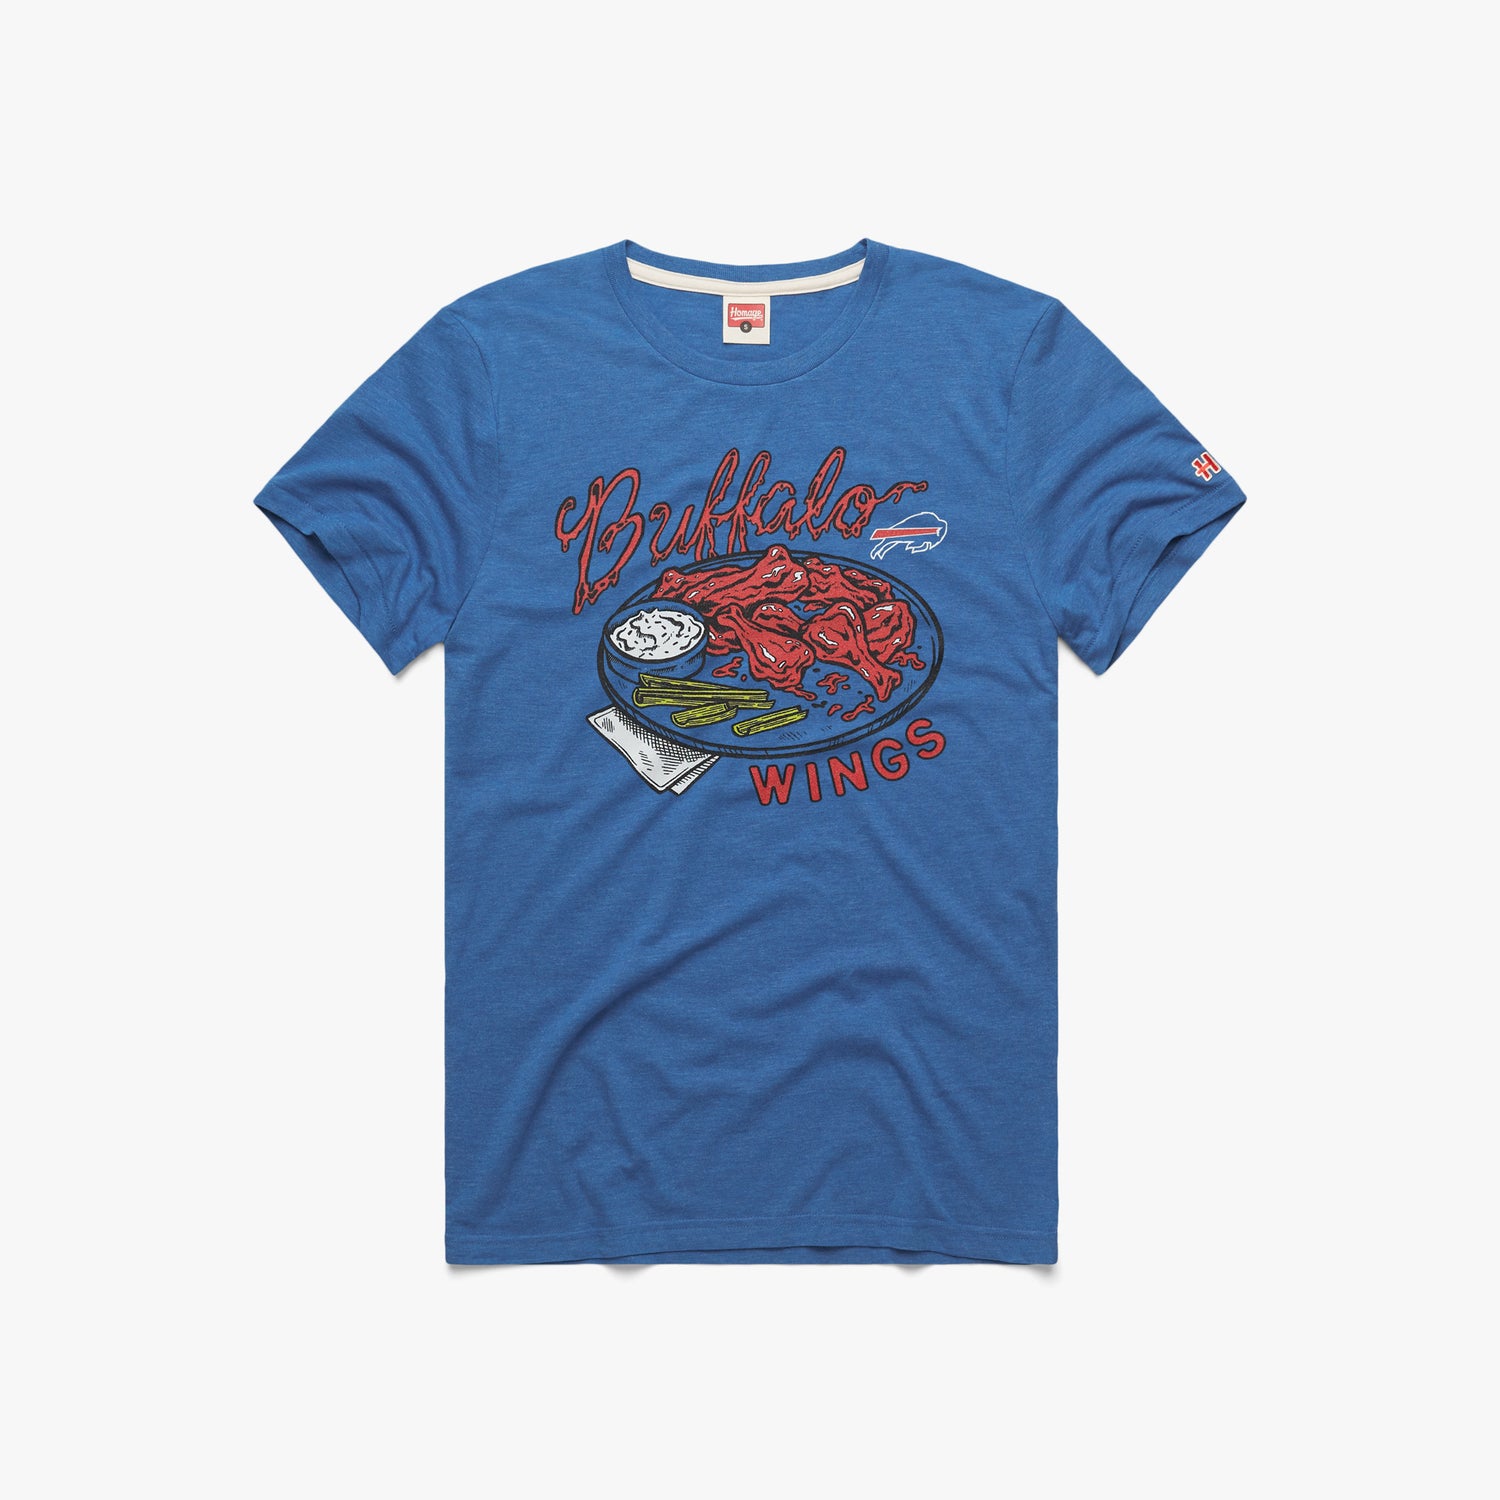 Bills Buffalo Wings T-Shirt from Homage. | Officially Licensed Vintage NFL Apparel from Homage Pro Shop.